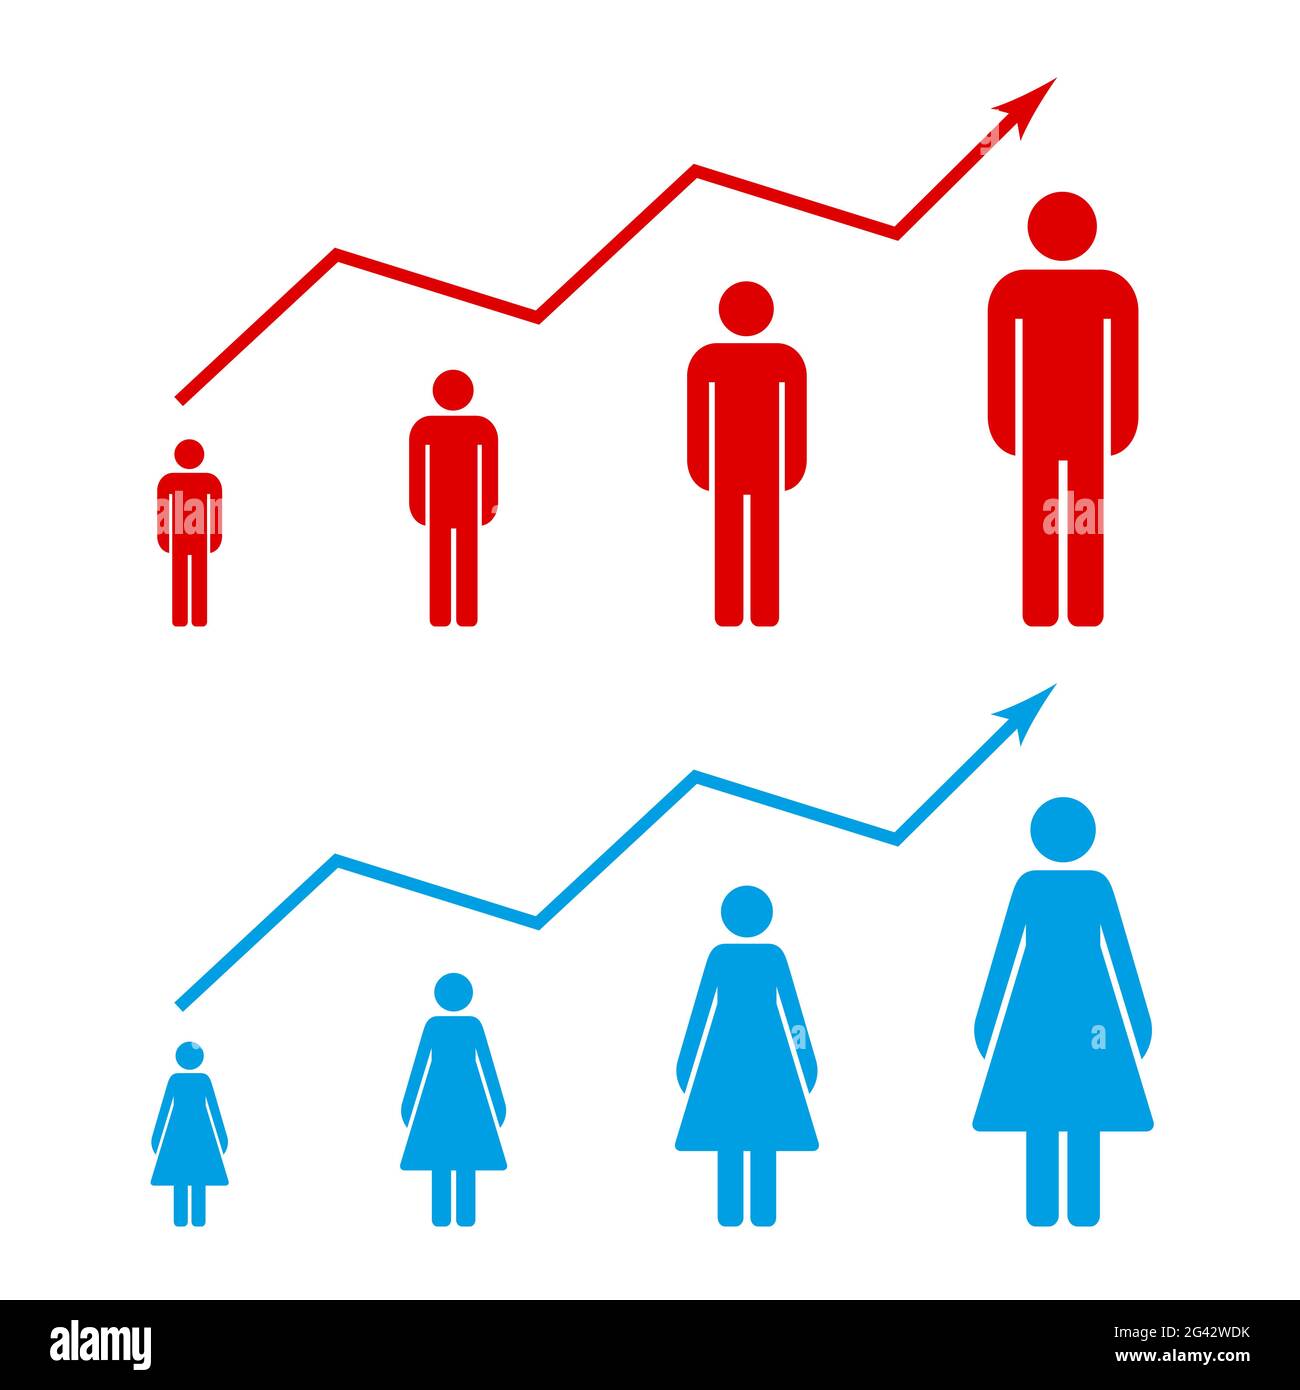 Population growth chart graph. Population density growing graph. Men and women statistics. Stick figure simple icons. illustration. Stock Photo